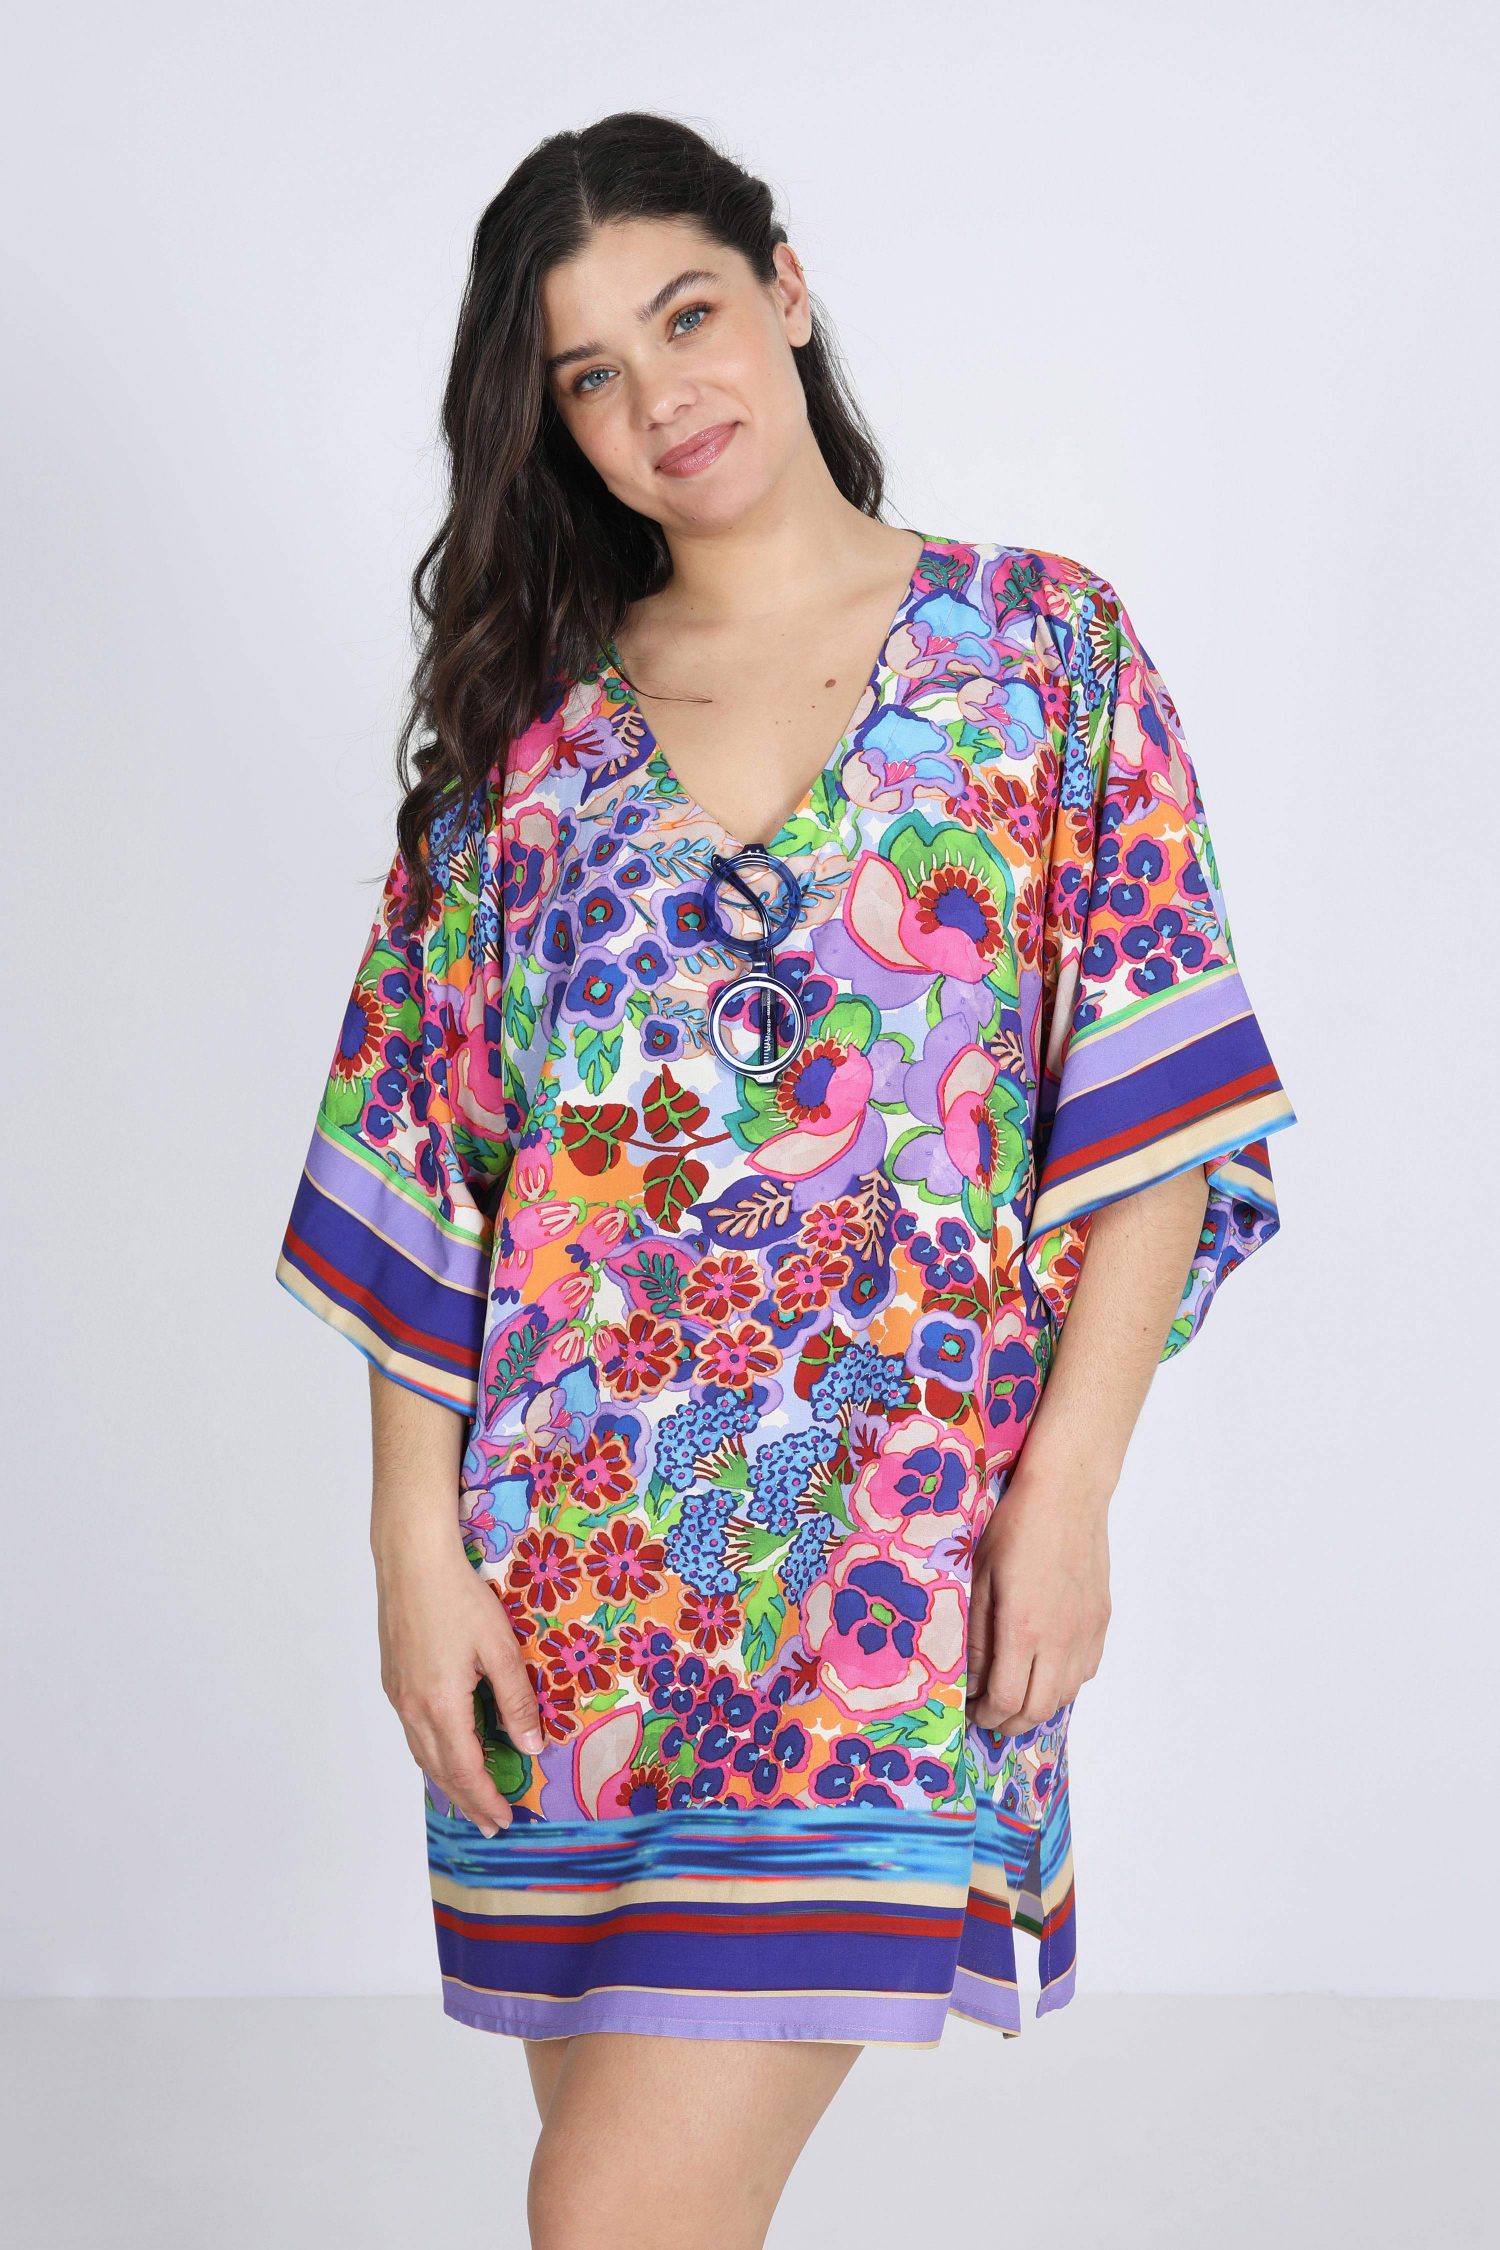 Floral print tunic with striped base design